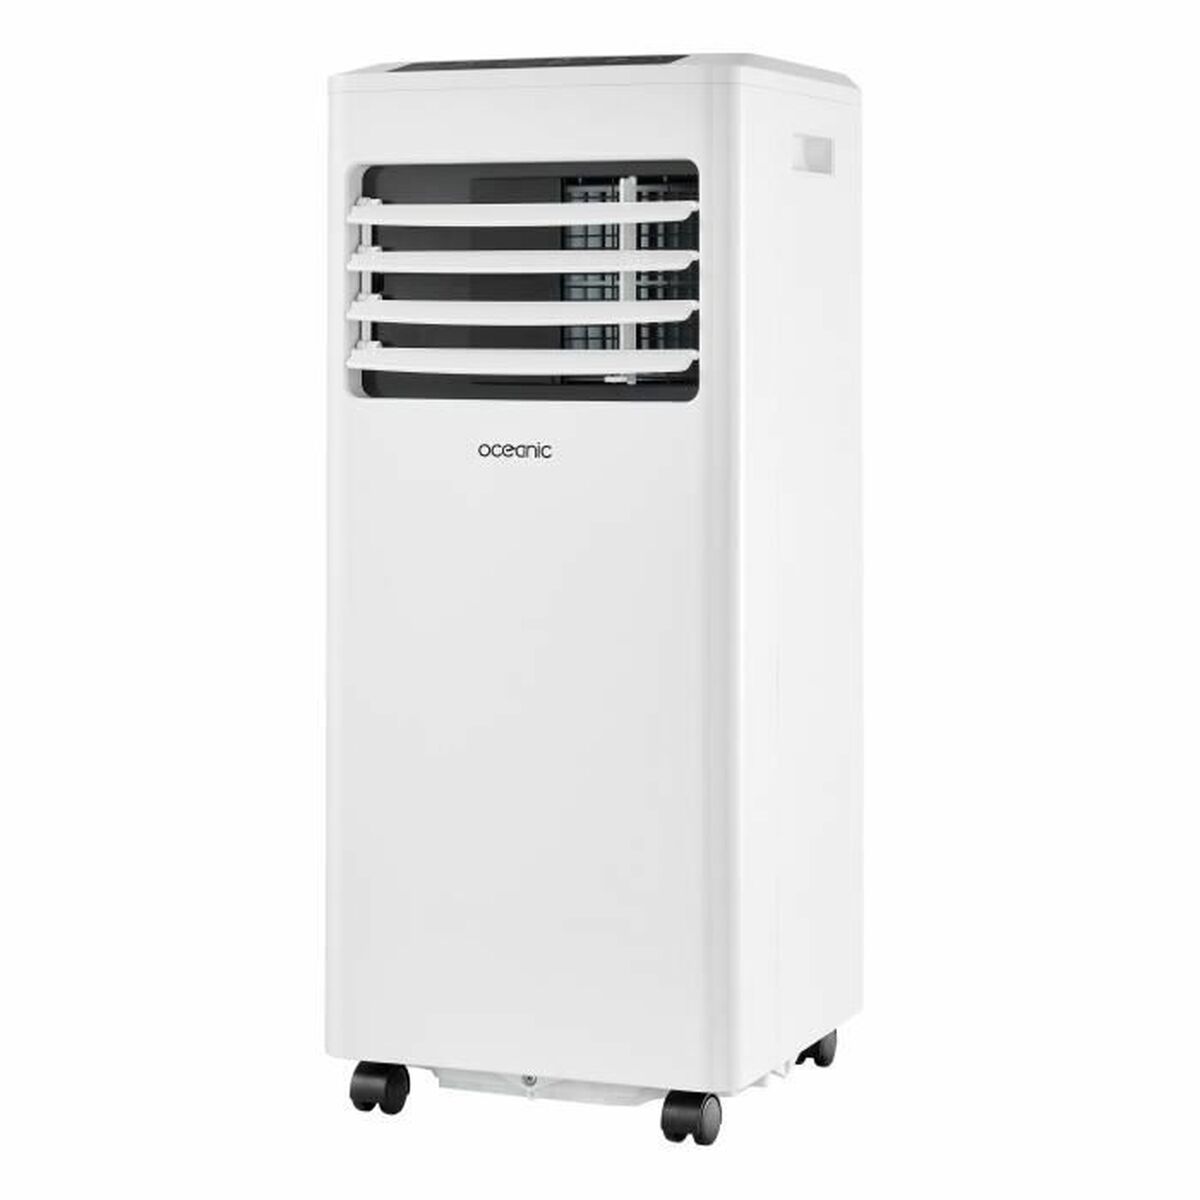 Draagbare Airconditioning Oceanic A 2050 W